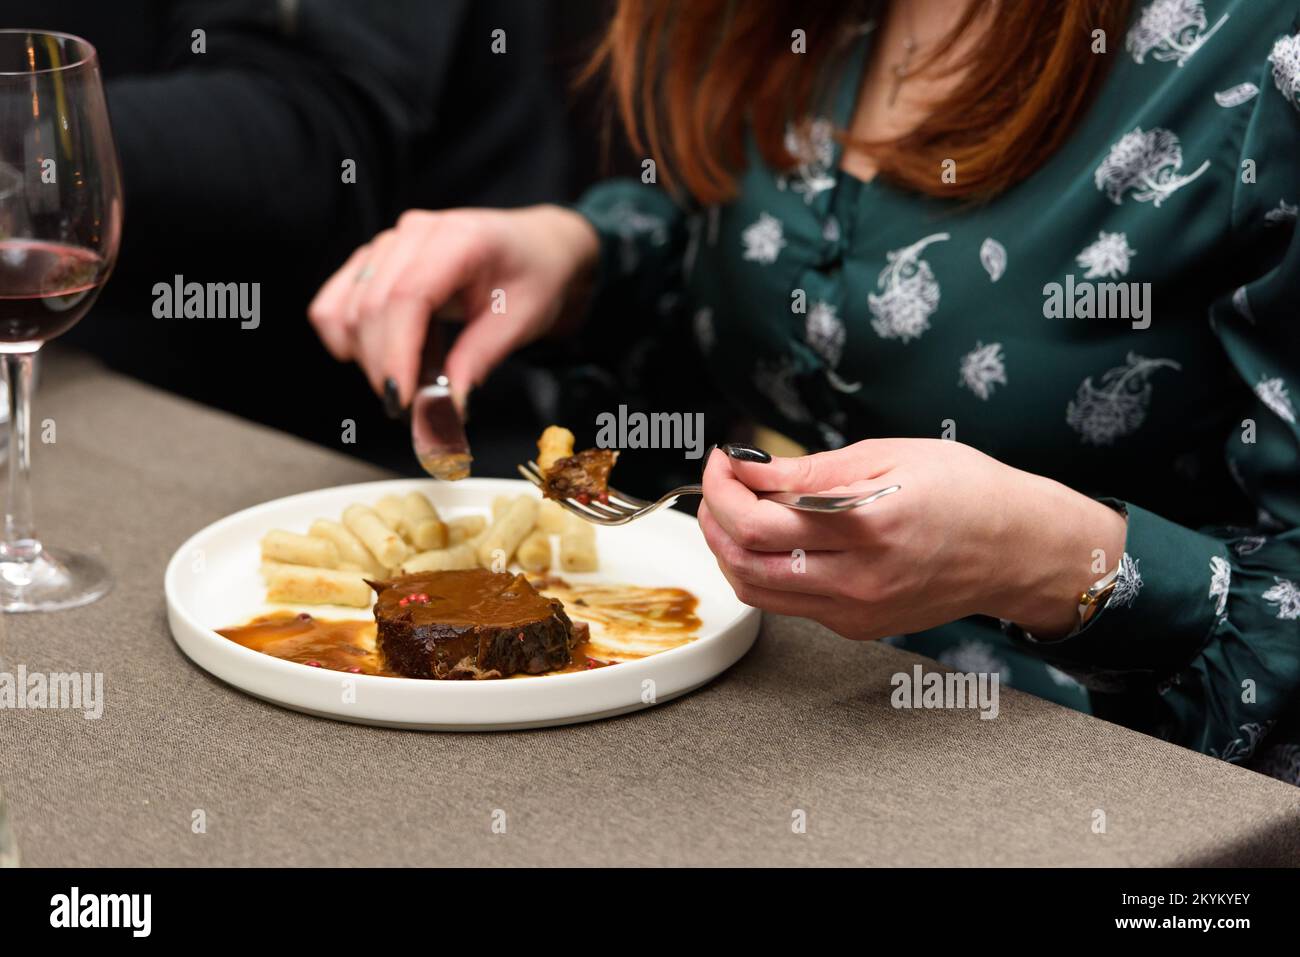 Woman eating pasticada with gnocchi, beef stew in a sauce. Croatian cuisine Stock Photo